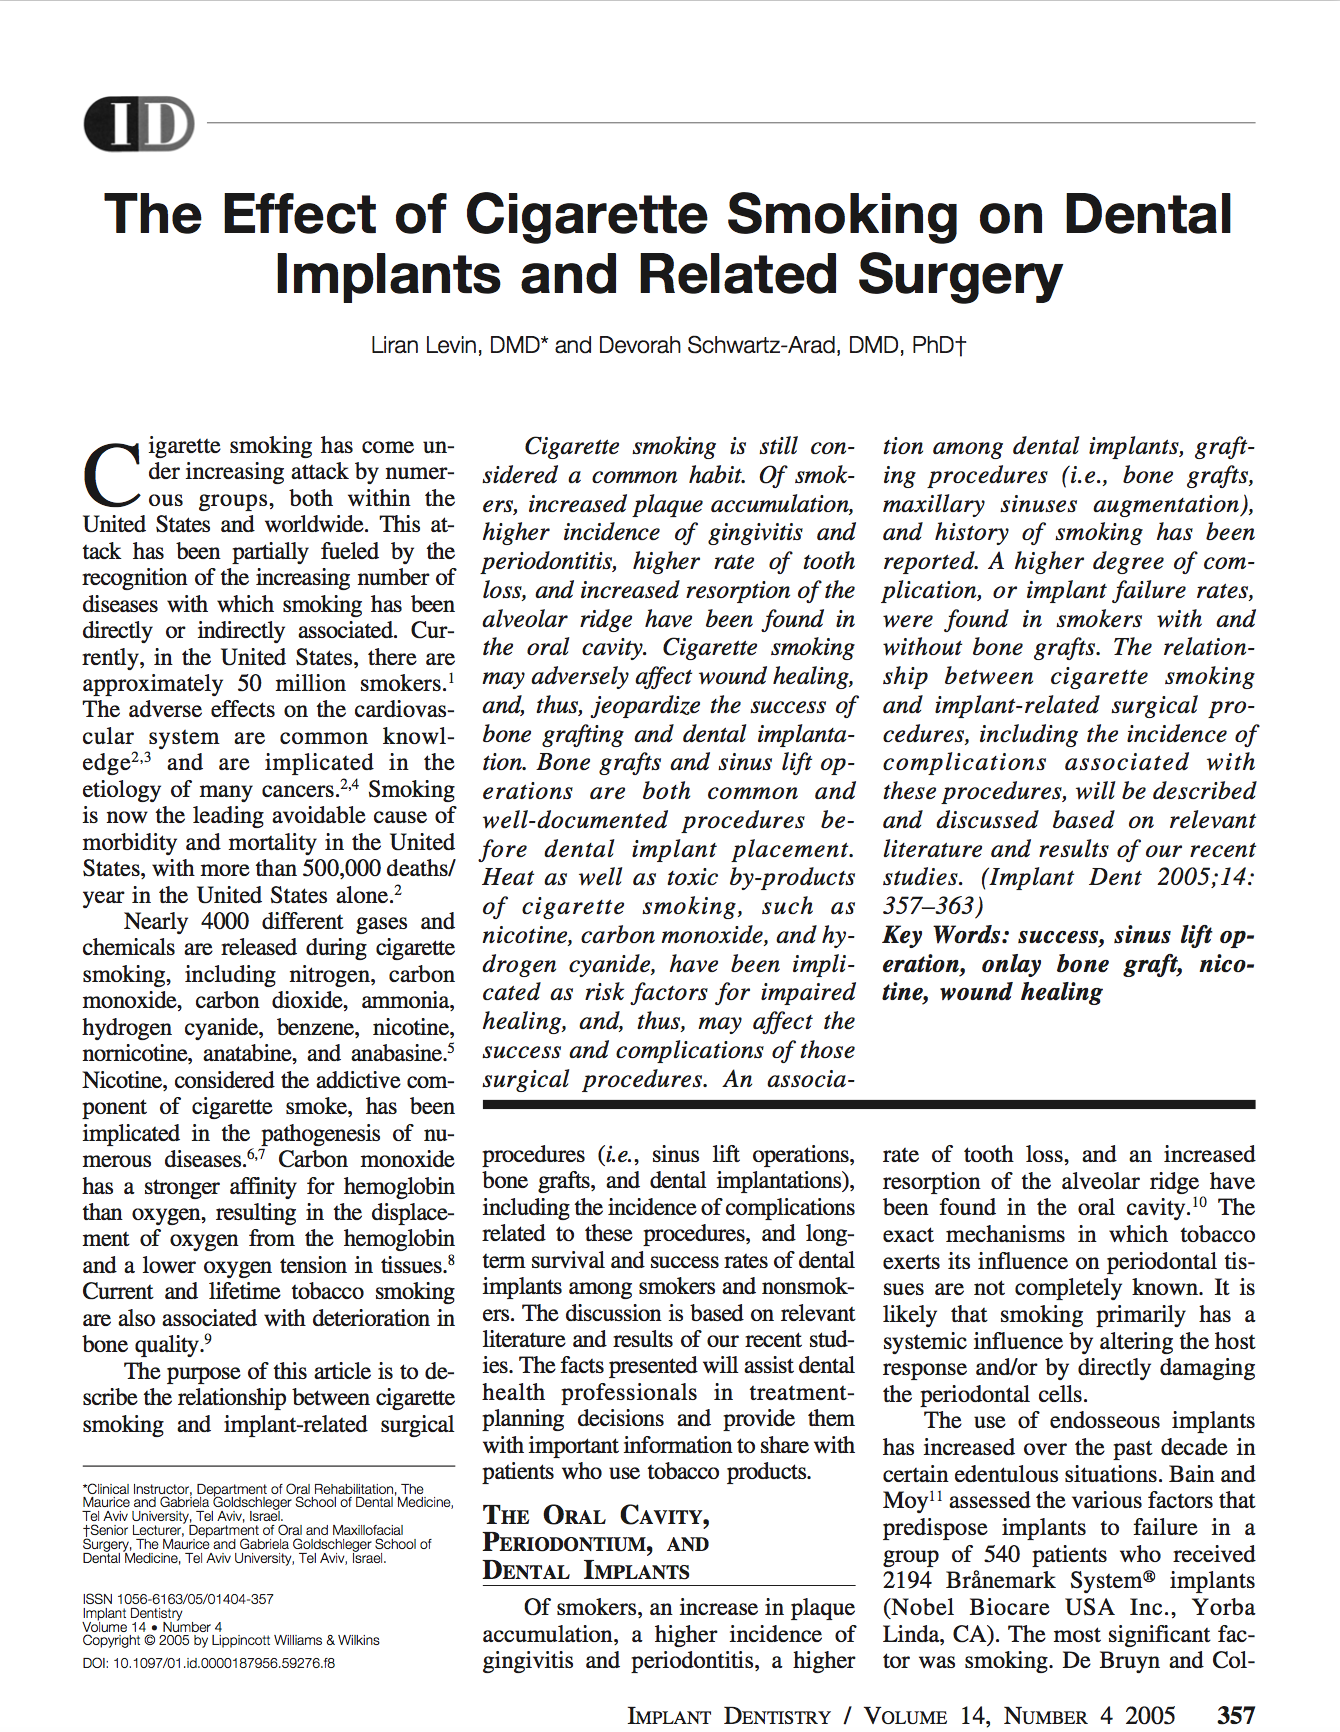 The effect of cigarette smoking on dental implants and related surgery